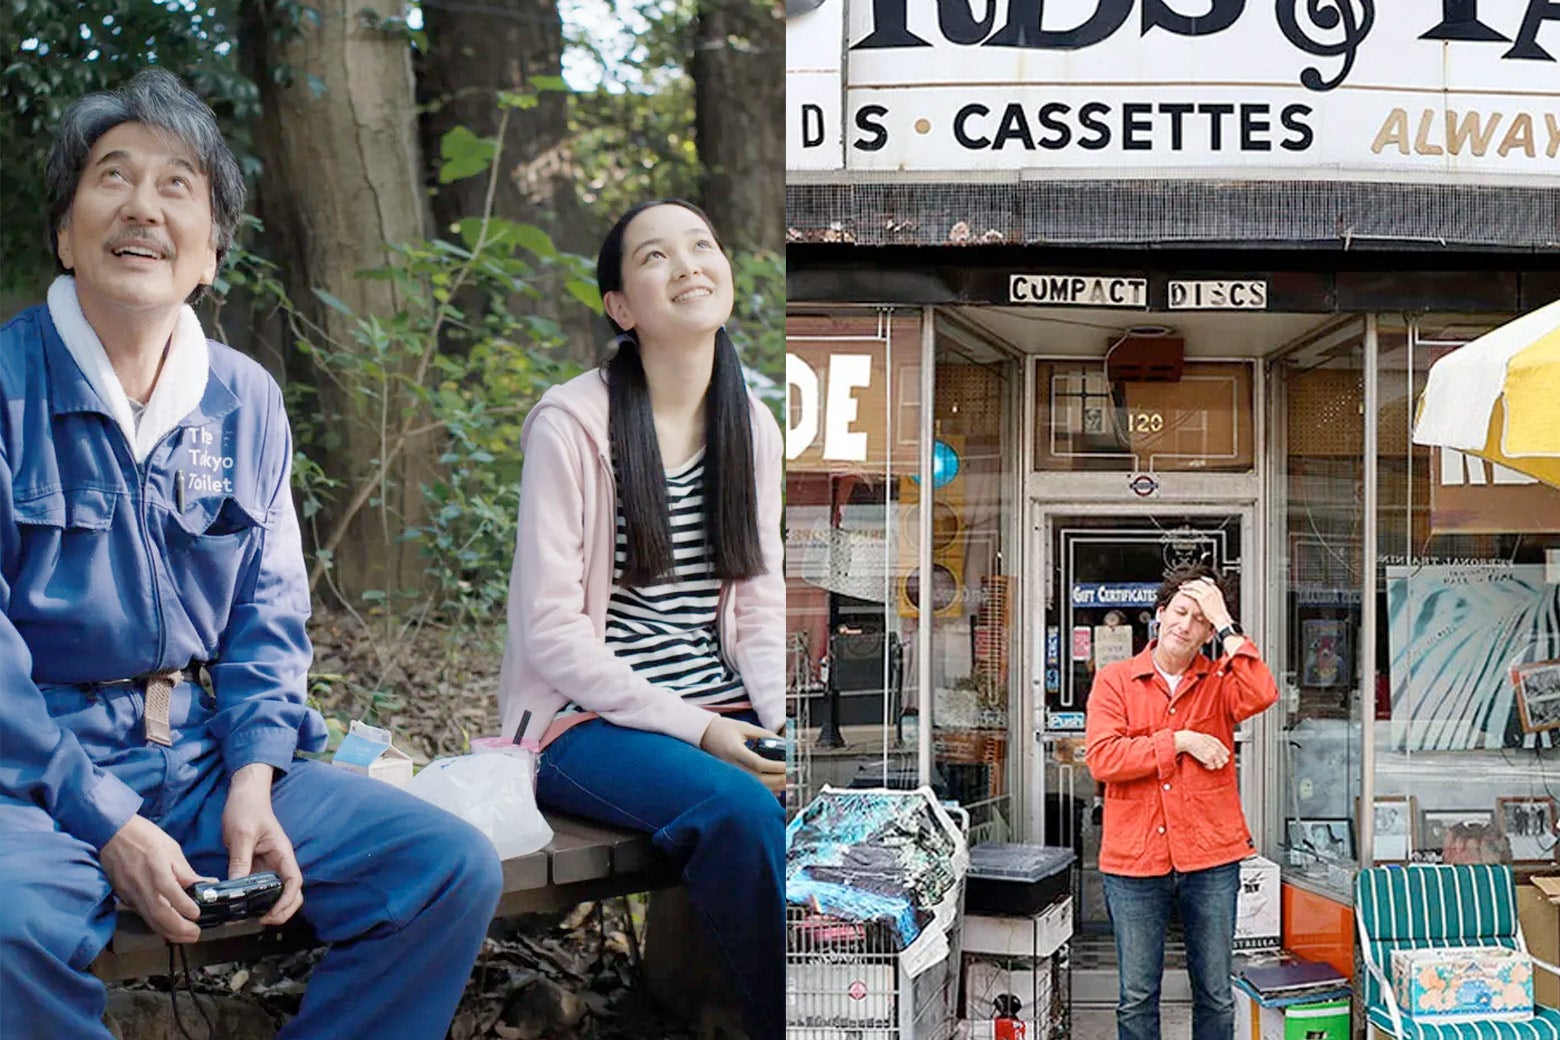 On the left, a Japanese man with graying hair in a blue worksuit marked The Tokyo Toilet sits beside a young woman in a pink cardigan and jeans. In his hands is an old film camera, while in hers appears to be an iPhone. On the right, a white man in a red workshirt stands in front of an old music store, running his hand through his long brown hair and looking kind of stressed. 